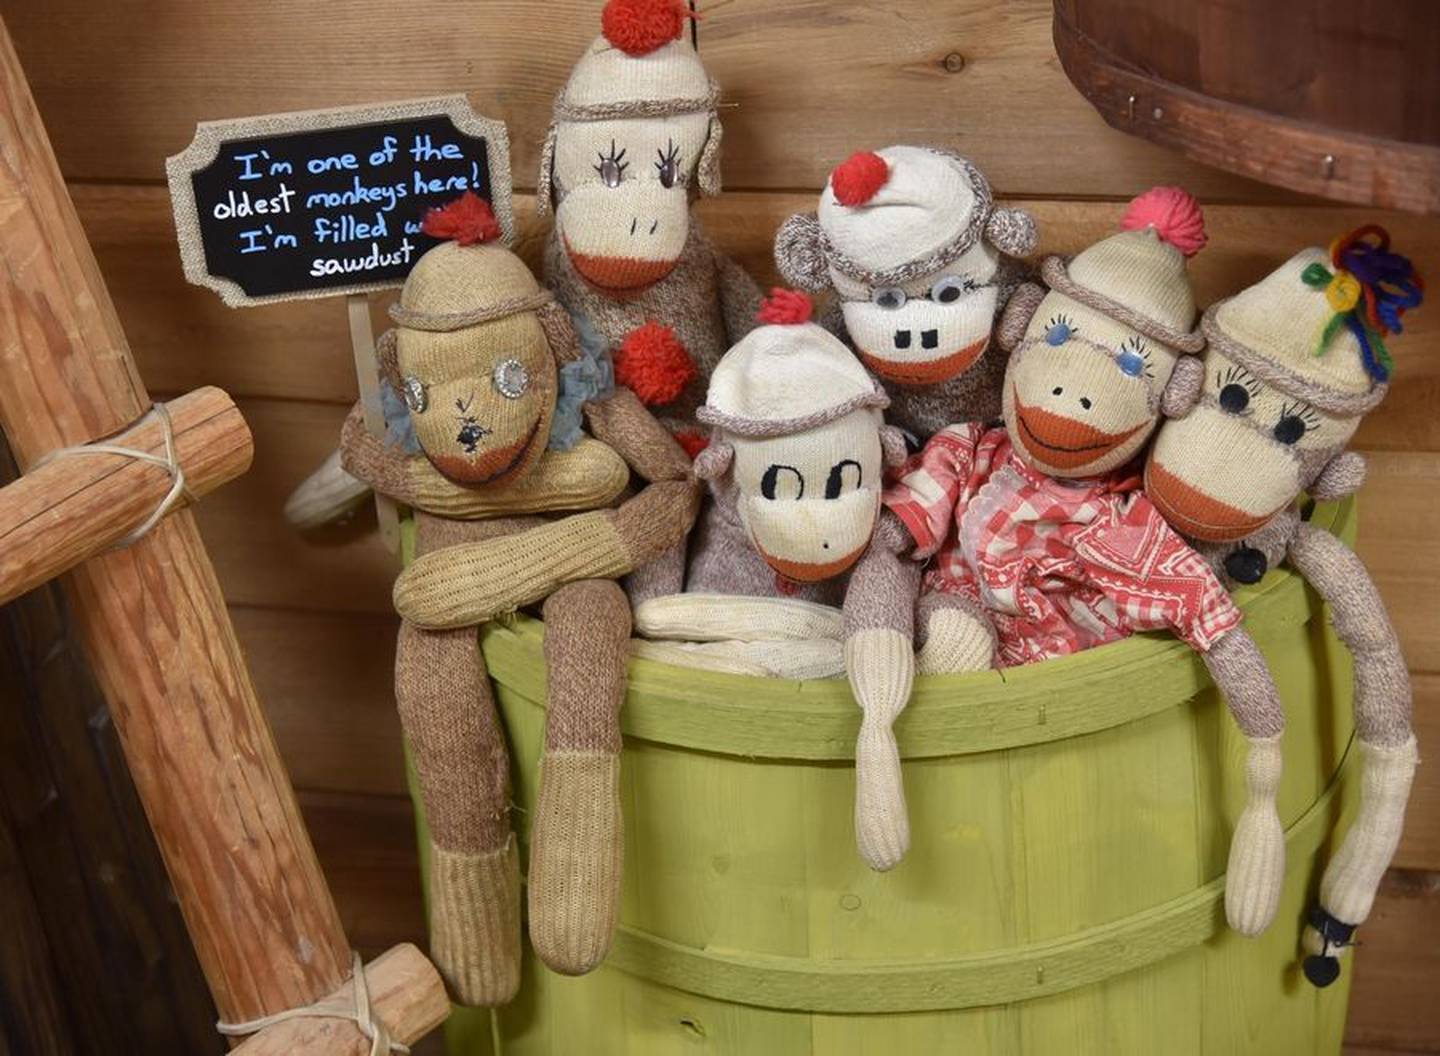 A sock monkey filled with sawdust from the 1930s is one of the oldest at the Sock Monkey Museum in Long Grove.